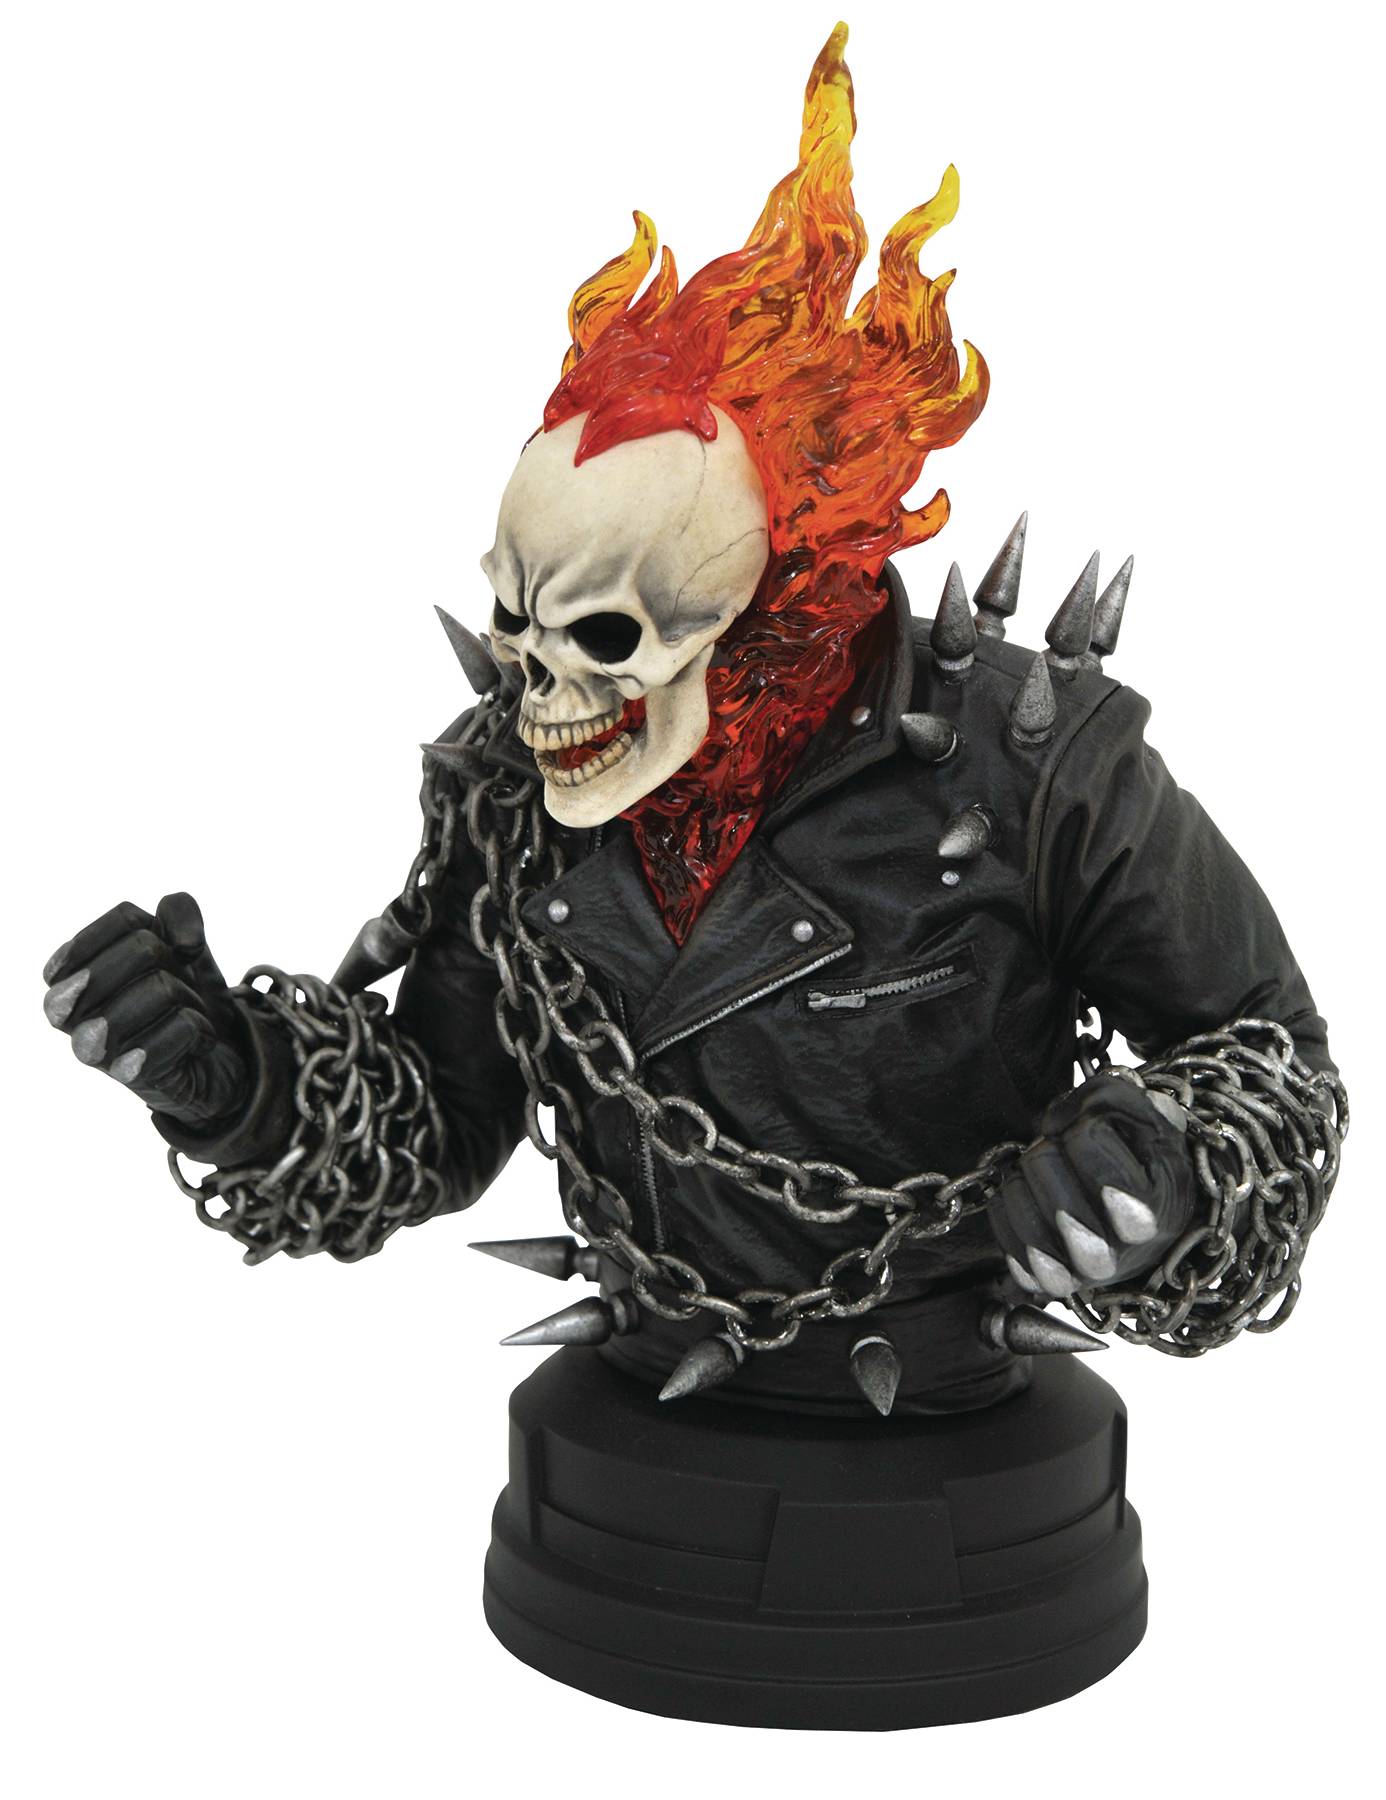 MARVEL COMIC GHOST RIDER 1/6 SCALE BUST